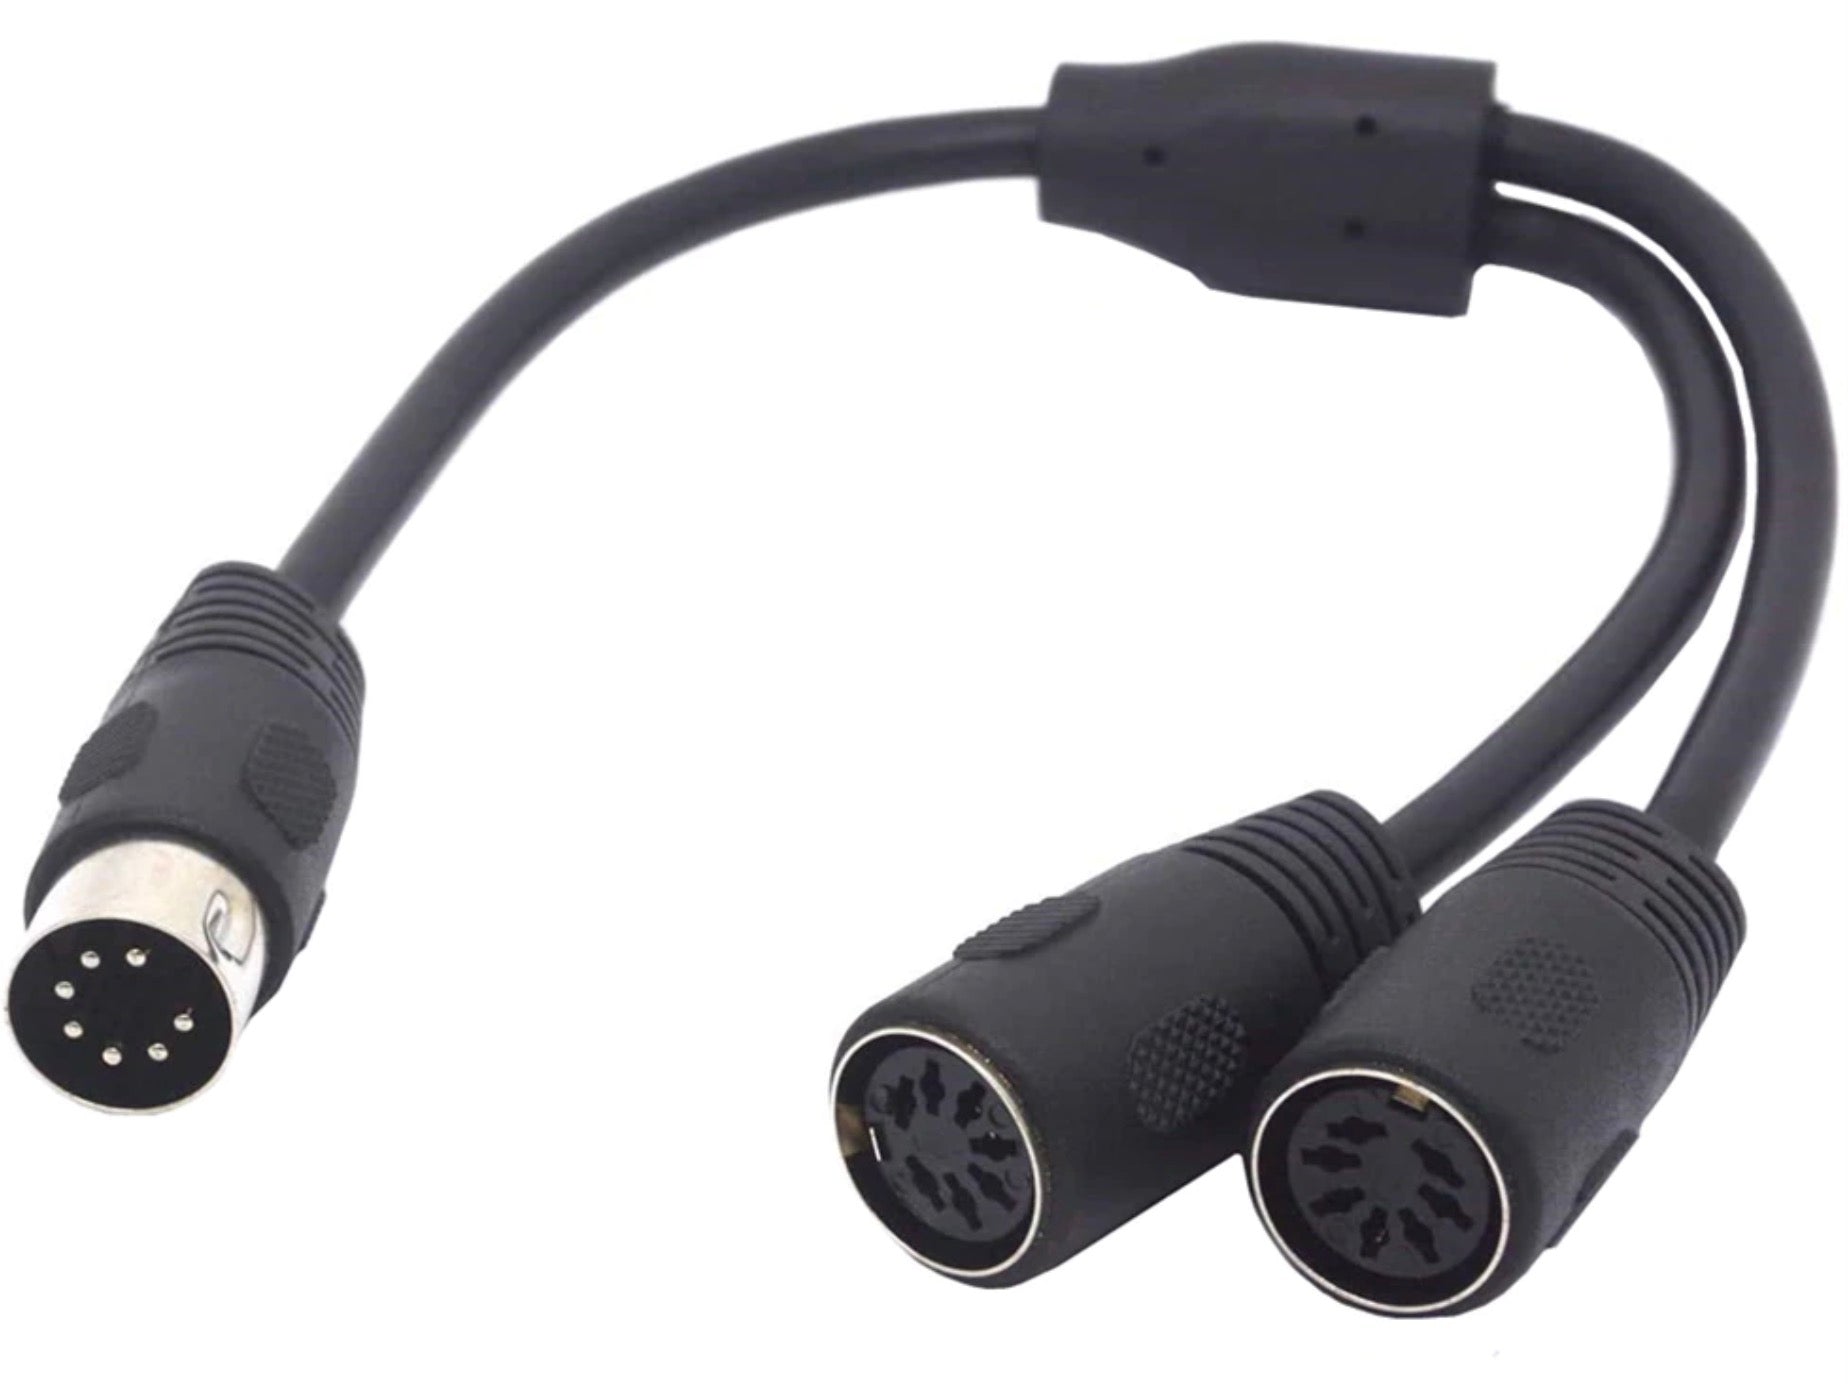 7-Pin Male to Dual 7-Pin Din Female Y Splitter Cable for Bang Olufsen Naim Quad Stereo Systems